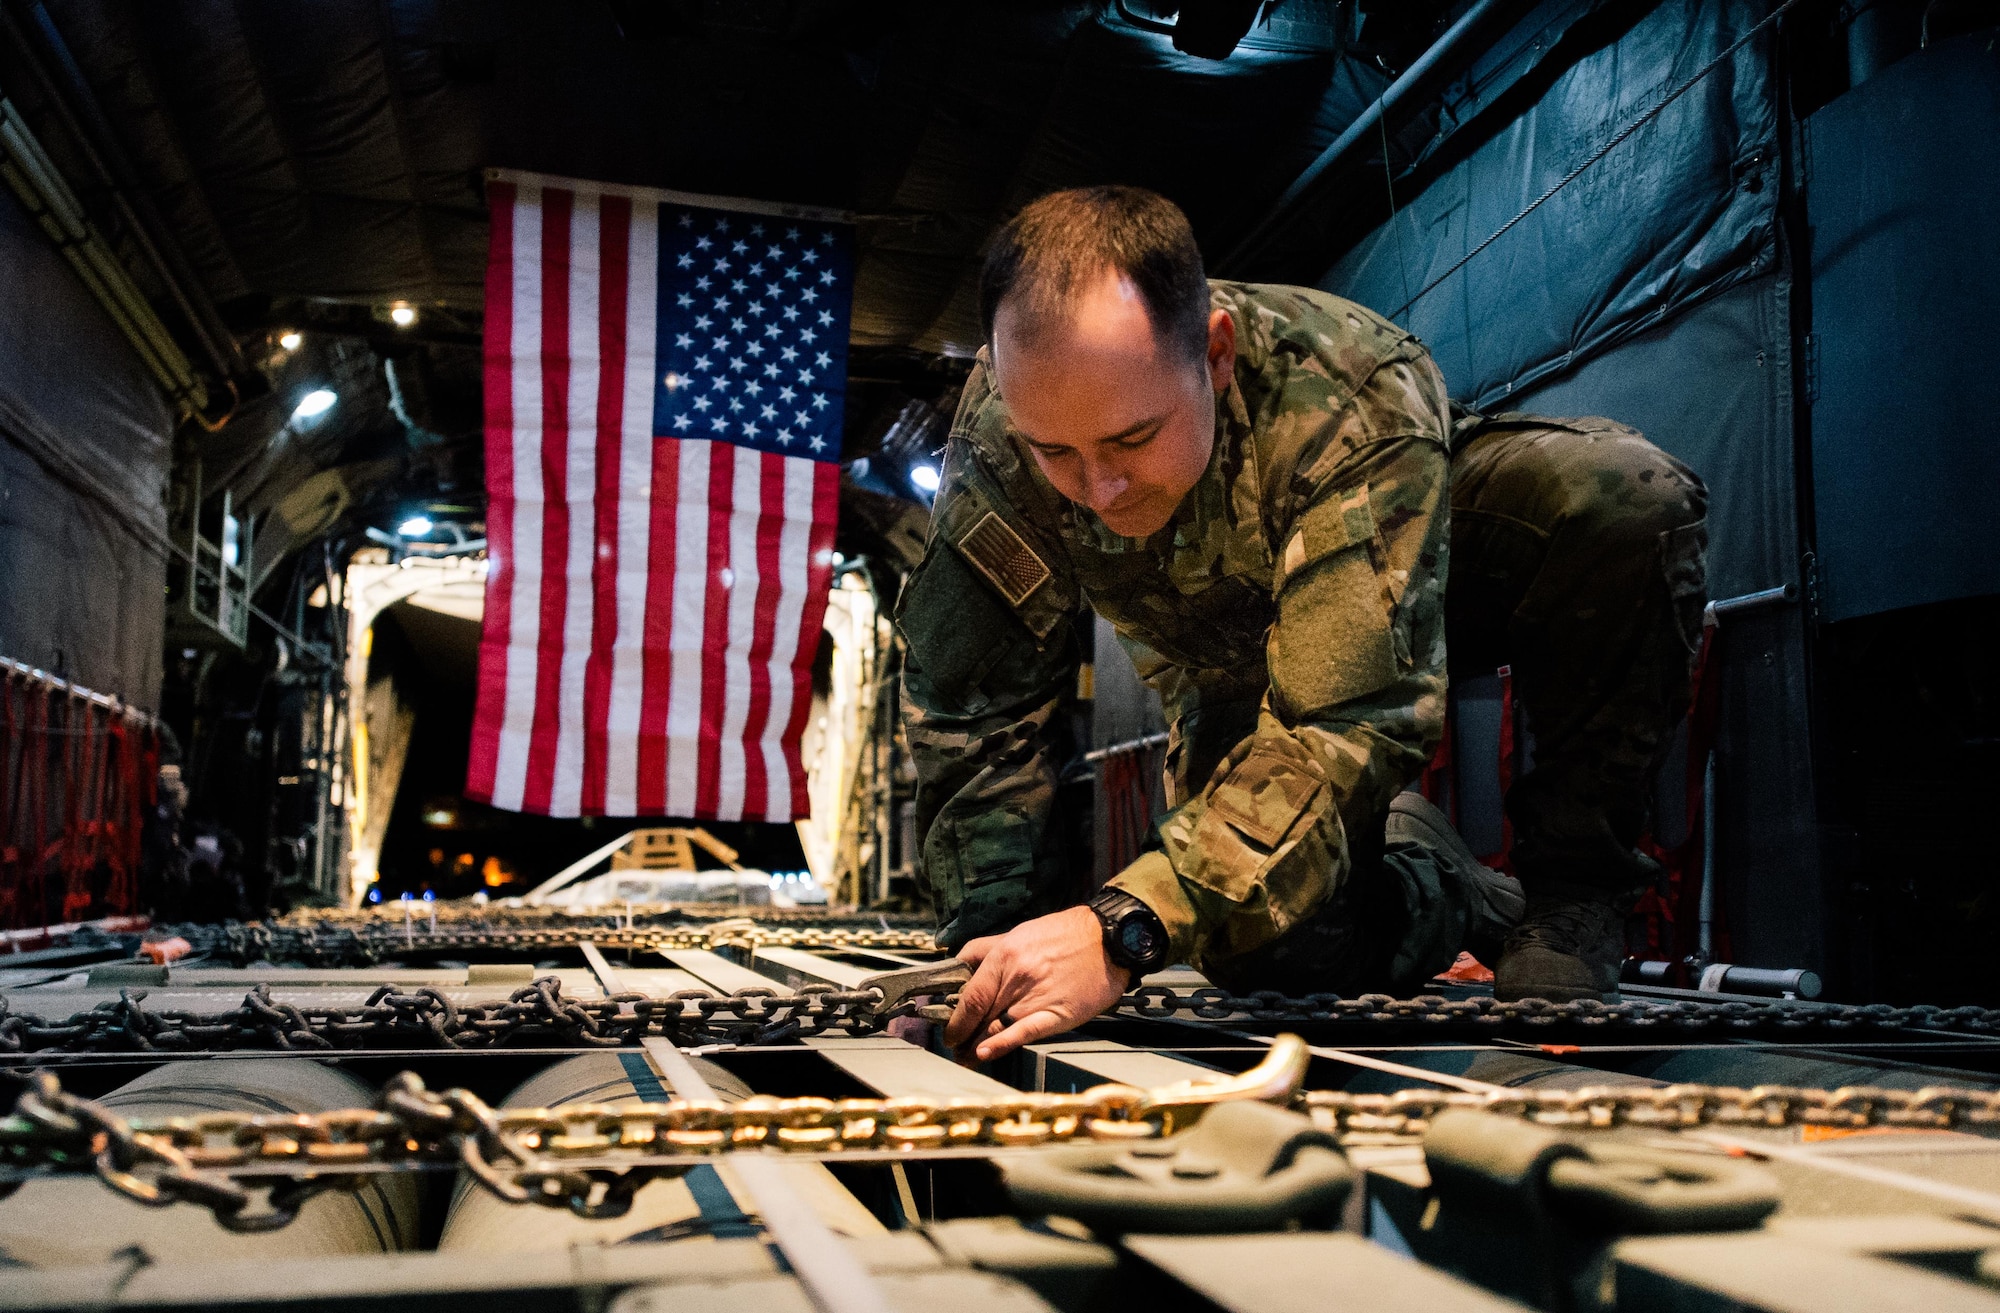 Senior Airman Creg Dubois, a 737th Expeditionary Airlift Squadron loadmaster, secures cargo before take-off inside a C-130H Hercules at an undisclosed location in Southwest Asia, Feb. 3, 2017. Dubois is part of a team that delivered 30,000 pounds of cargo to aide in the fight against ISIL. (U.S. Air Force photo/Senior Airman Jordan Castelan)